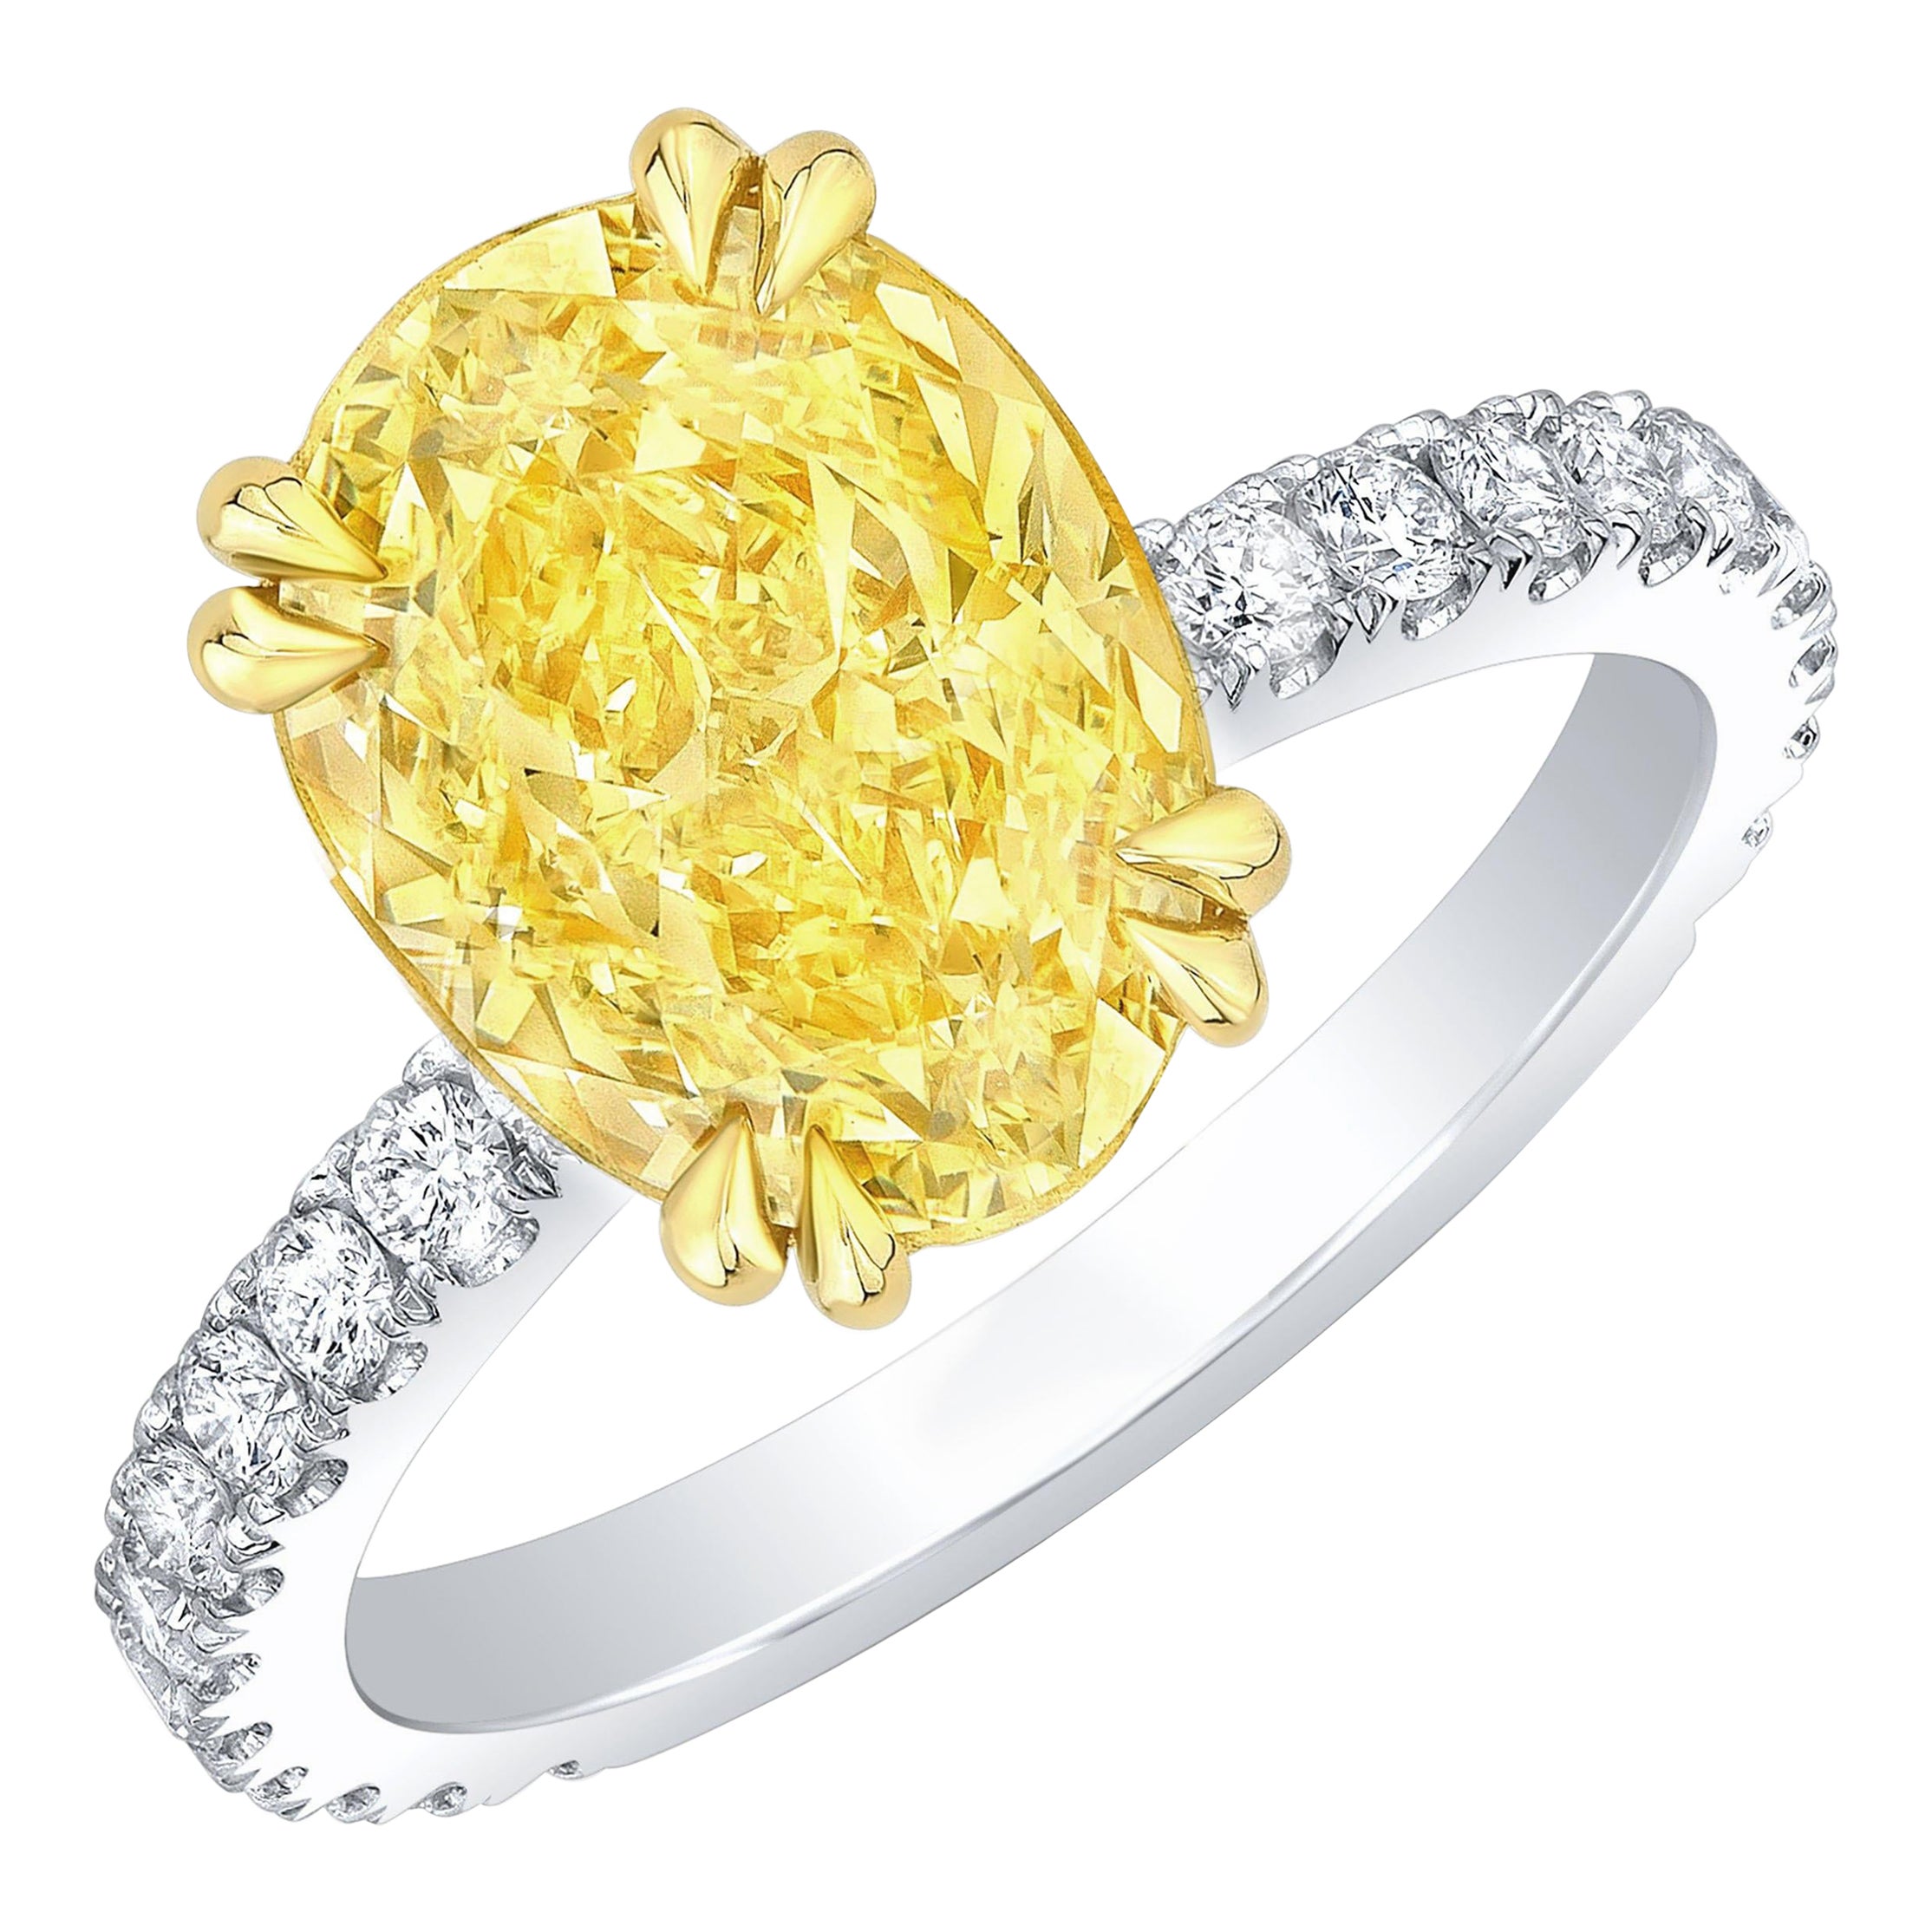 2.70 Carat Canary Fancy Light Yellow Oval Hidden Halo Engagement Ring VS1 GIA For Sale